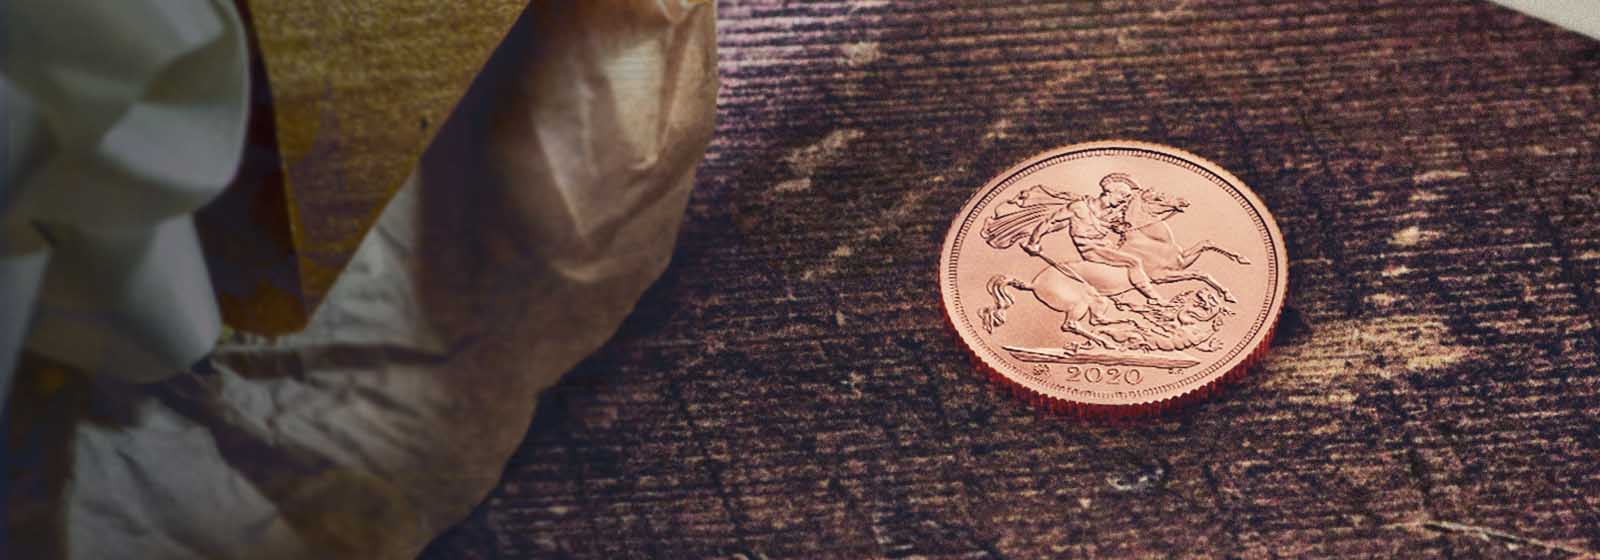 Celebrate a birthday with a year-dated coin